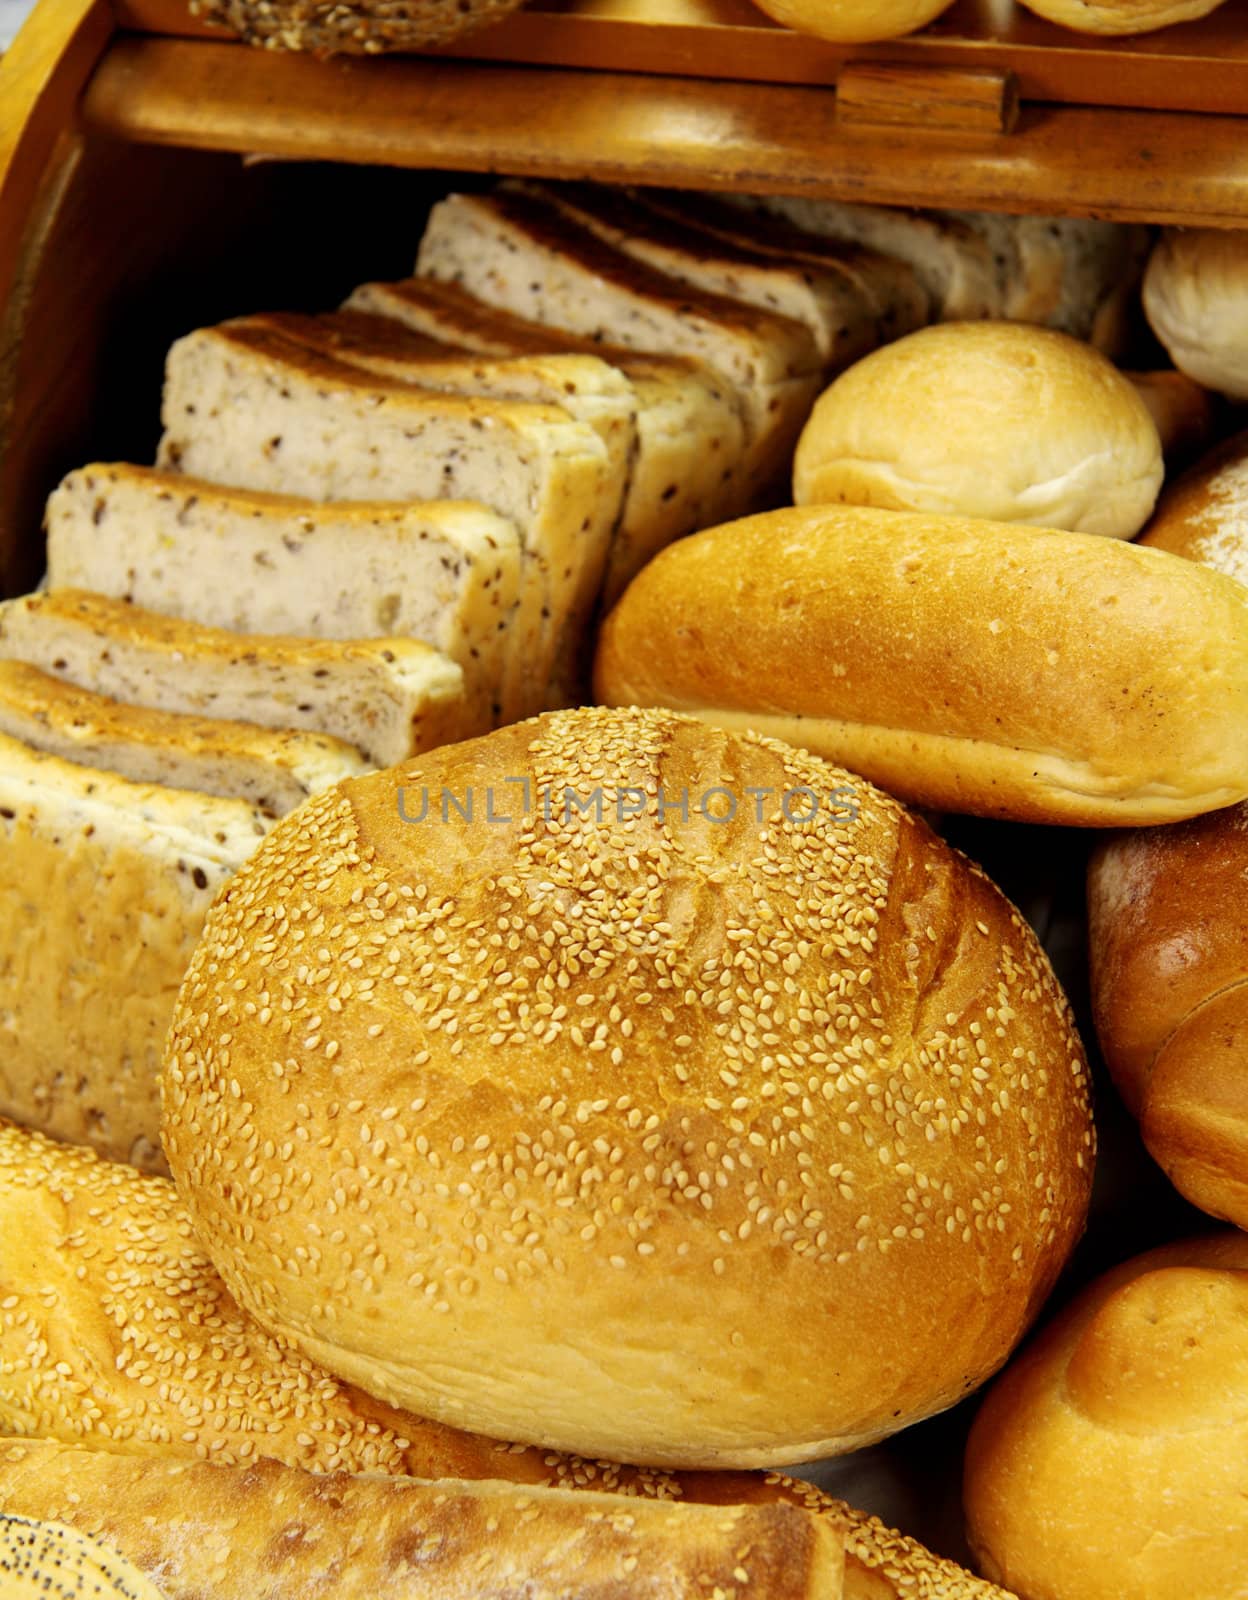 Cob bread loaf amongst a selection of different breads.